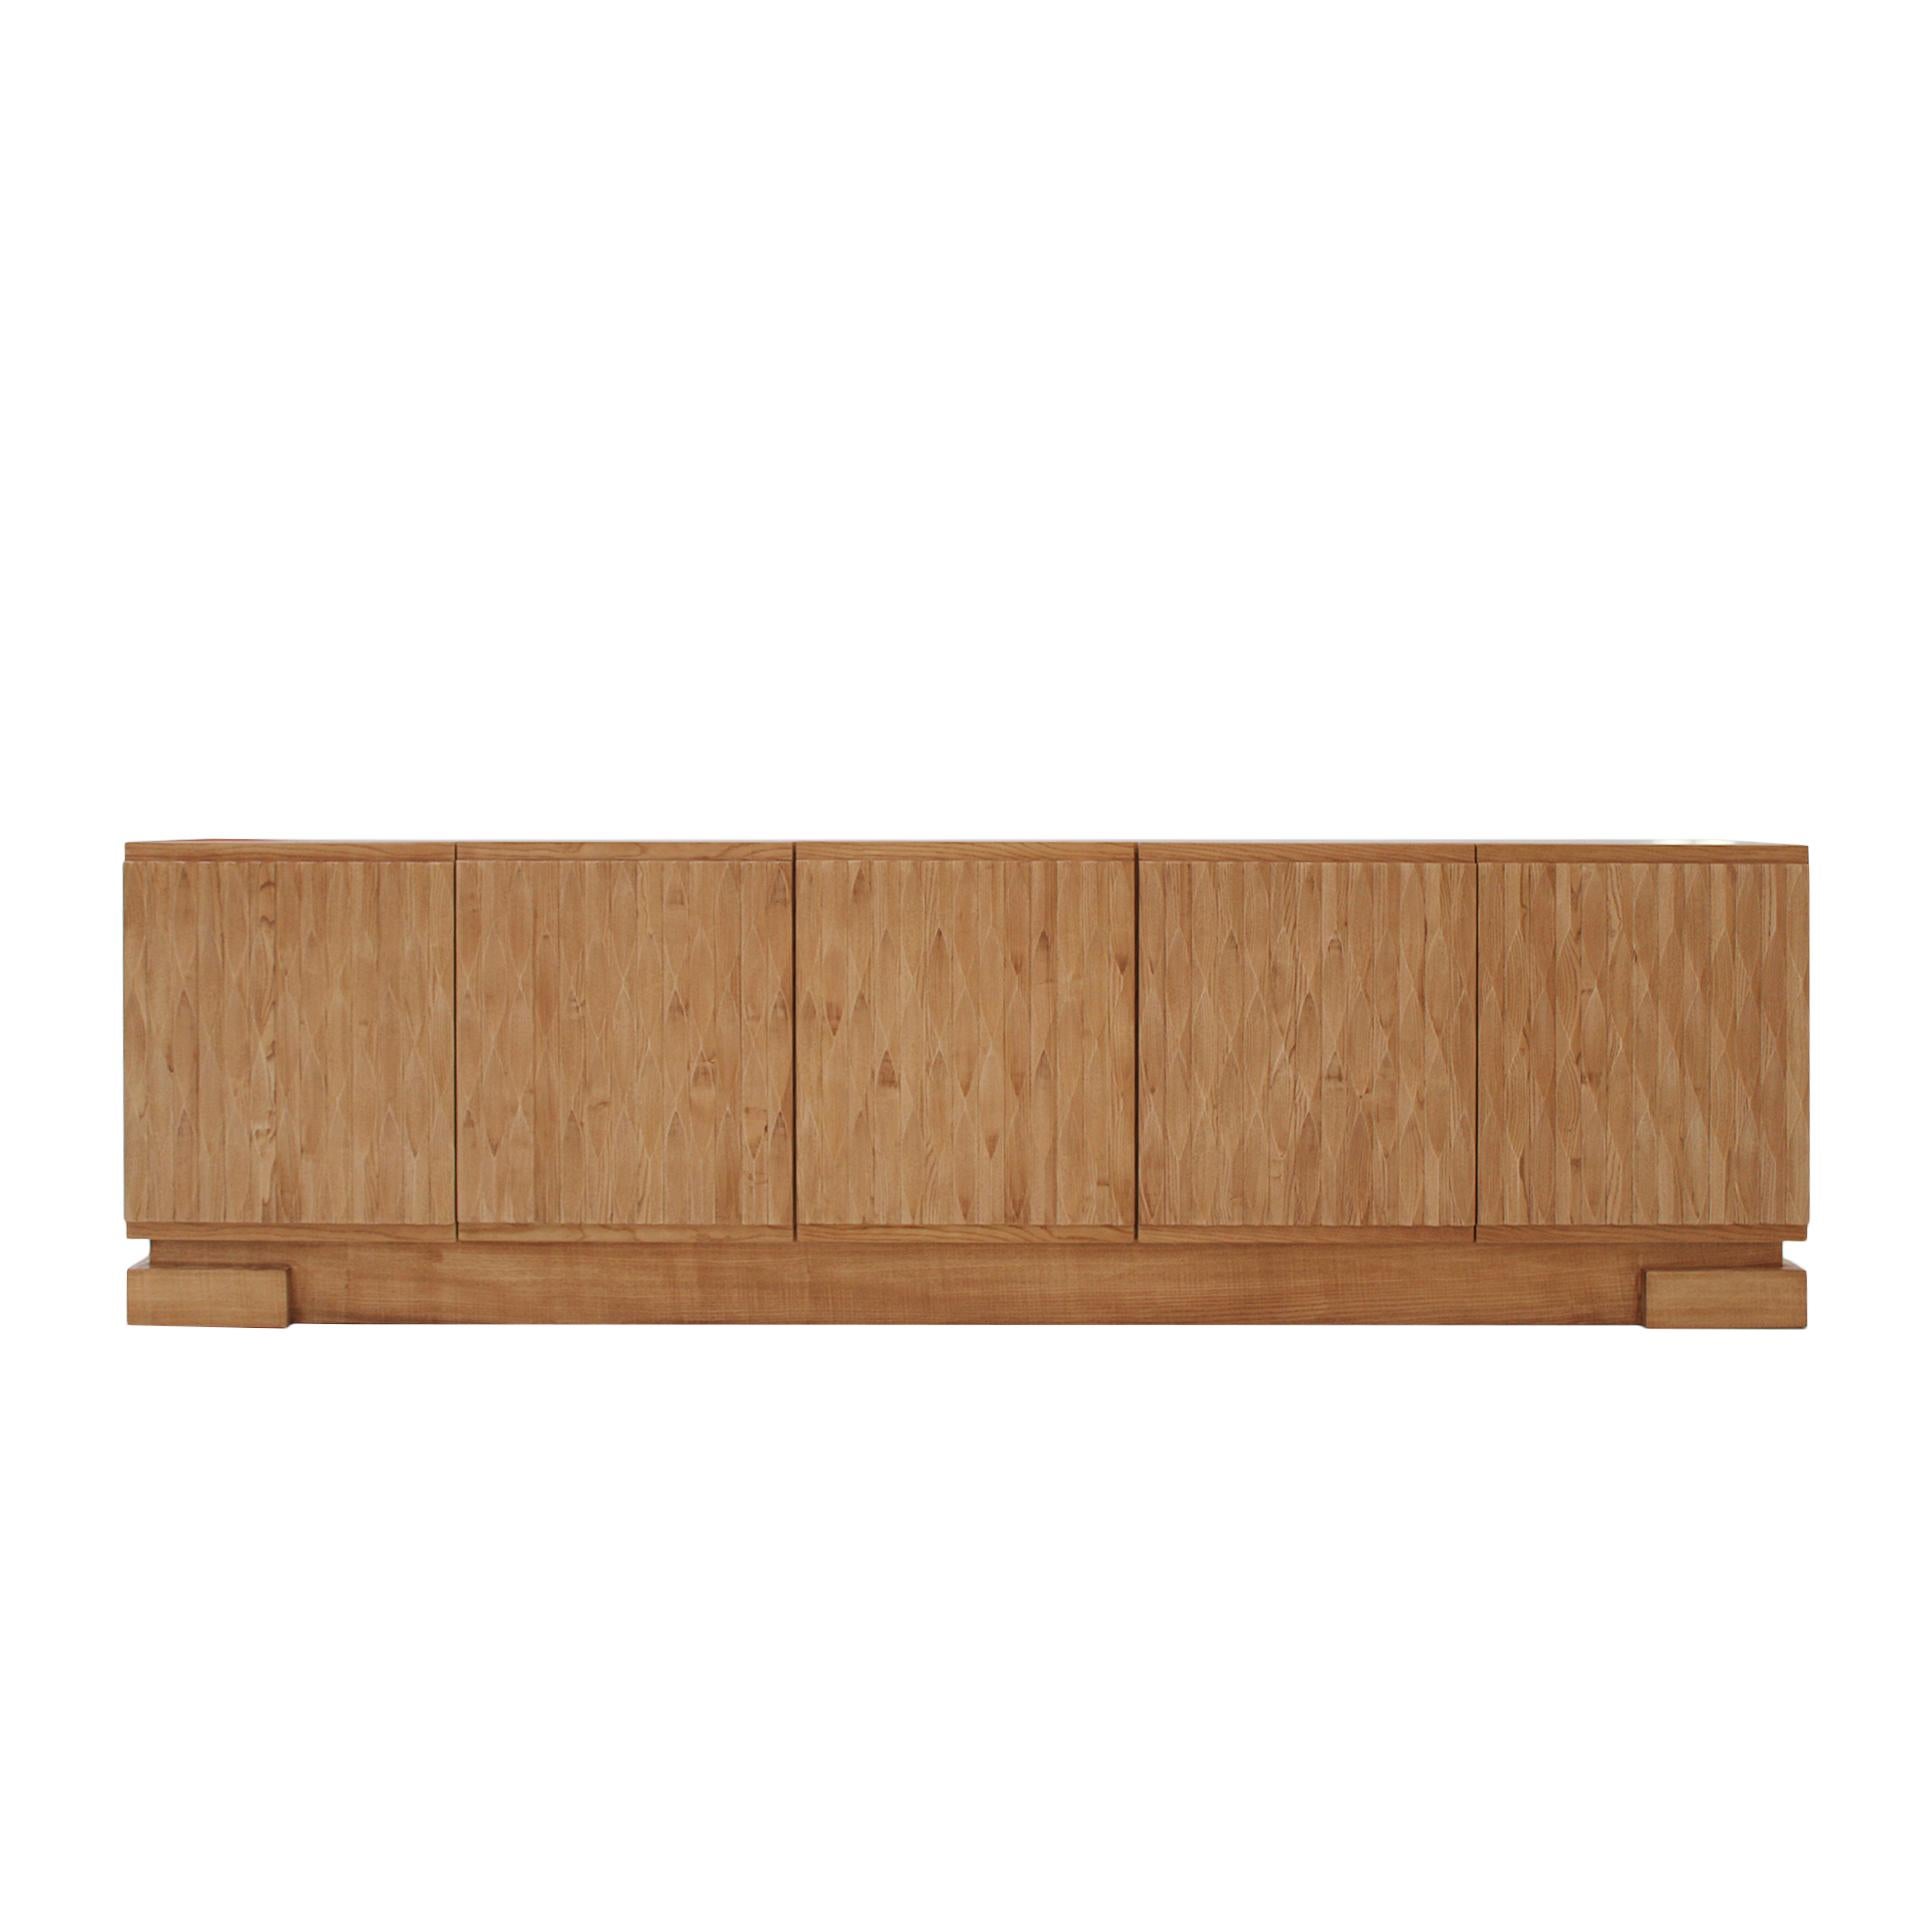 Oak wood sideboard with handcarved pattern in the doors. Manufactured in Italy.
Composed by five doors and oak skirting.

